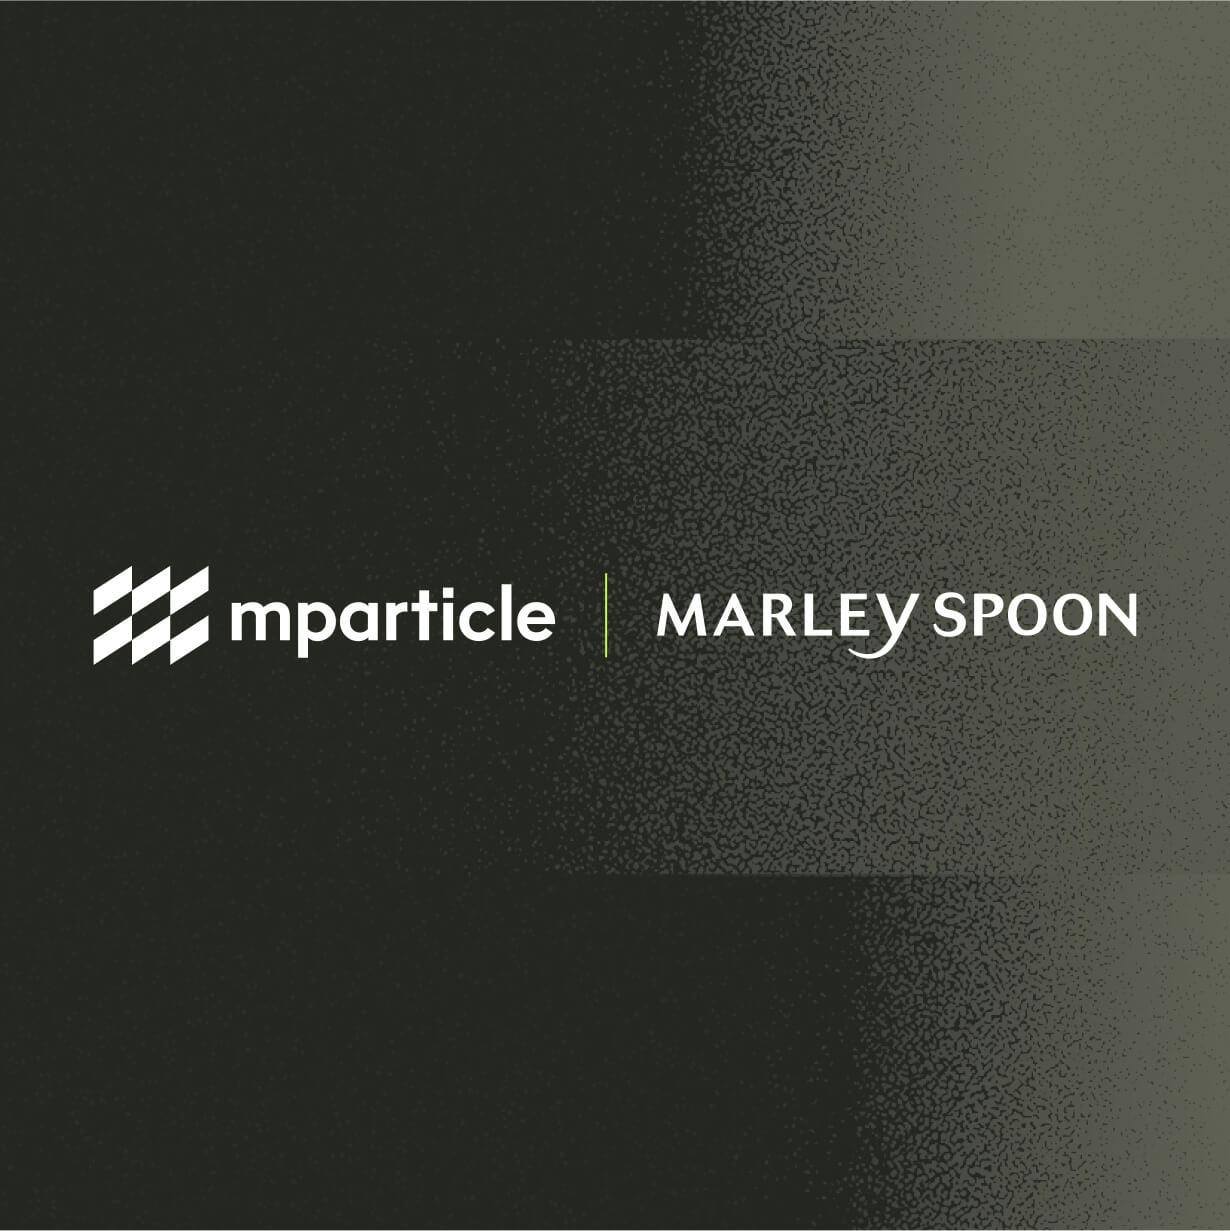 Marley Spoon implements mParticle to build a single customer view for multi-brand meal kit portfolio